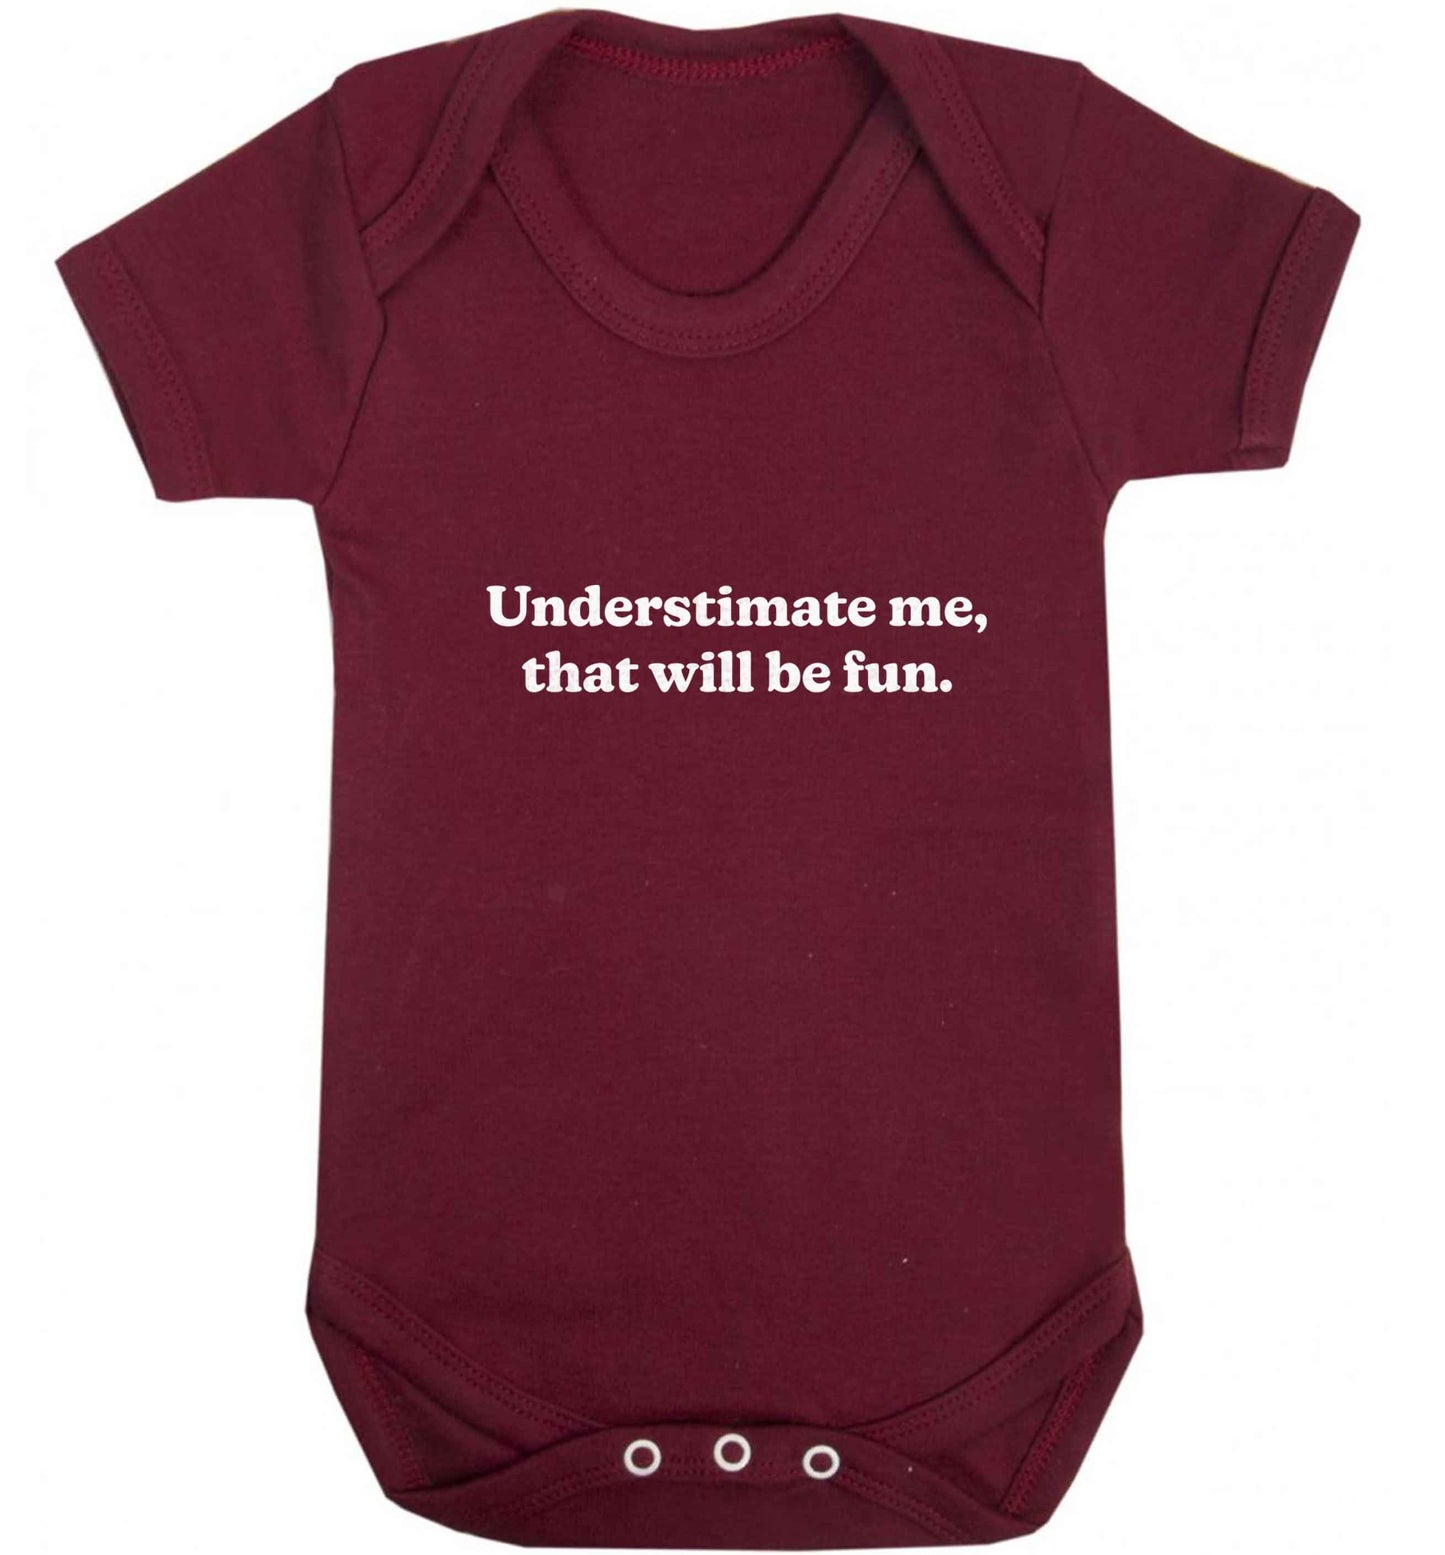 Underestimate me that will be fun baby vest maroon 18-24 months